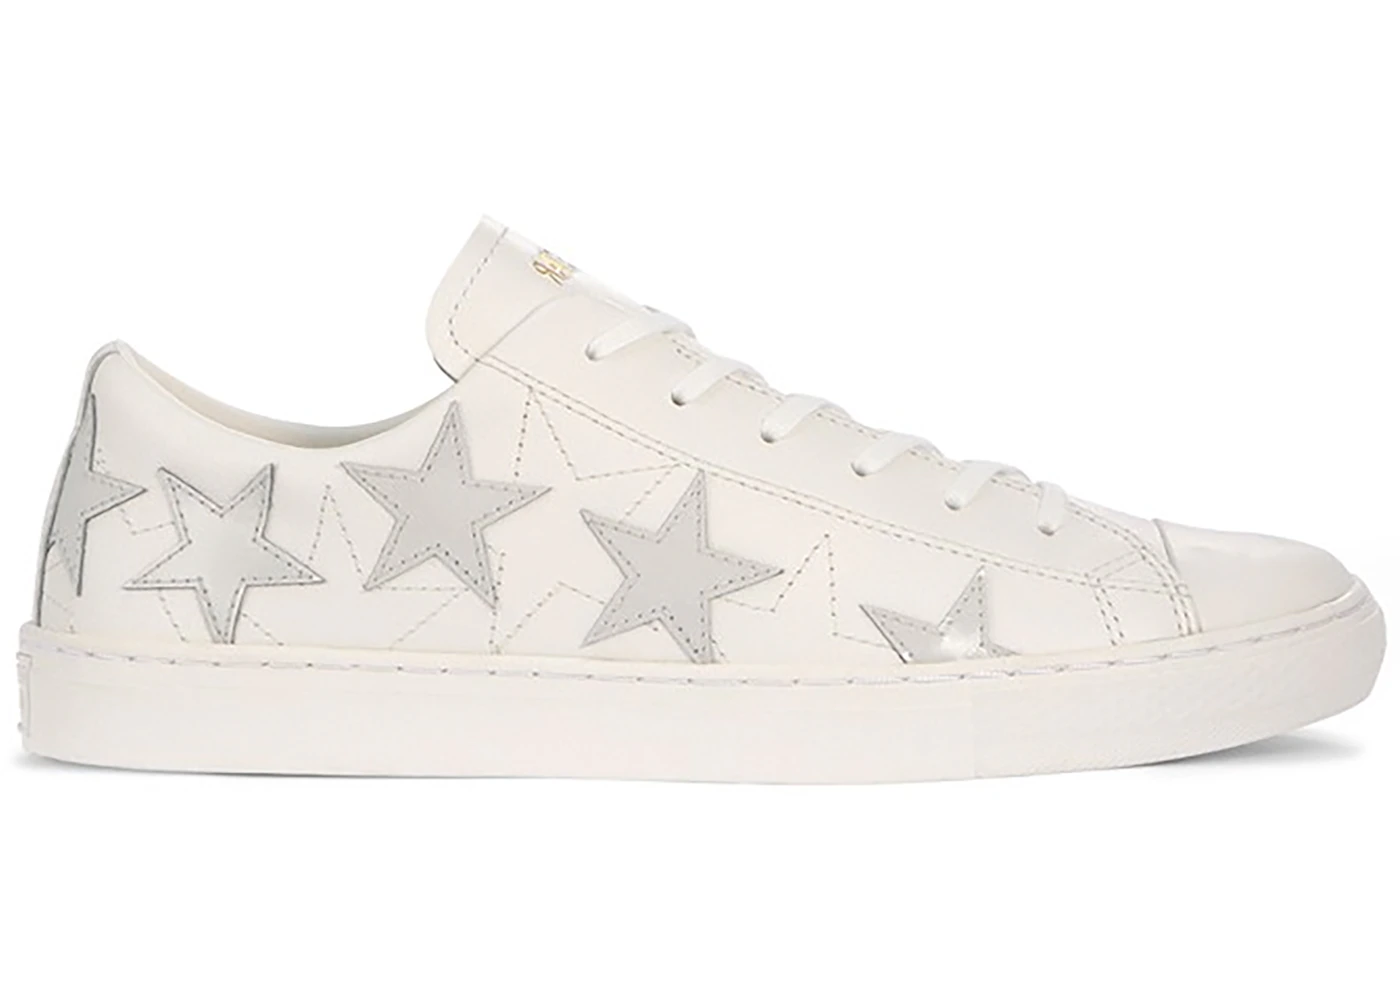 Converse All Star Coupe Ox Manystars White Men's - Sneakers - US